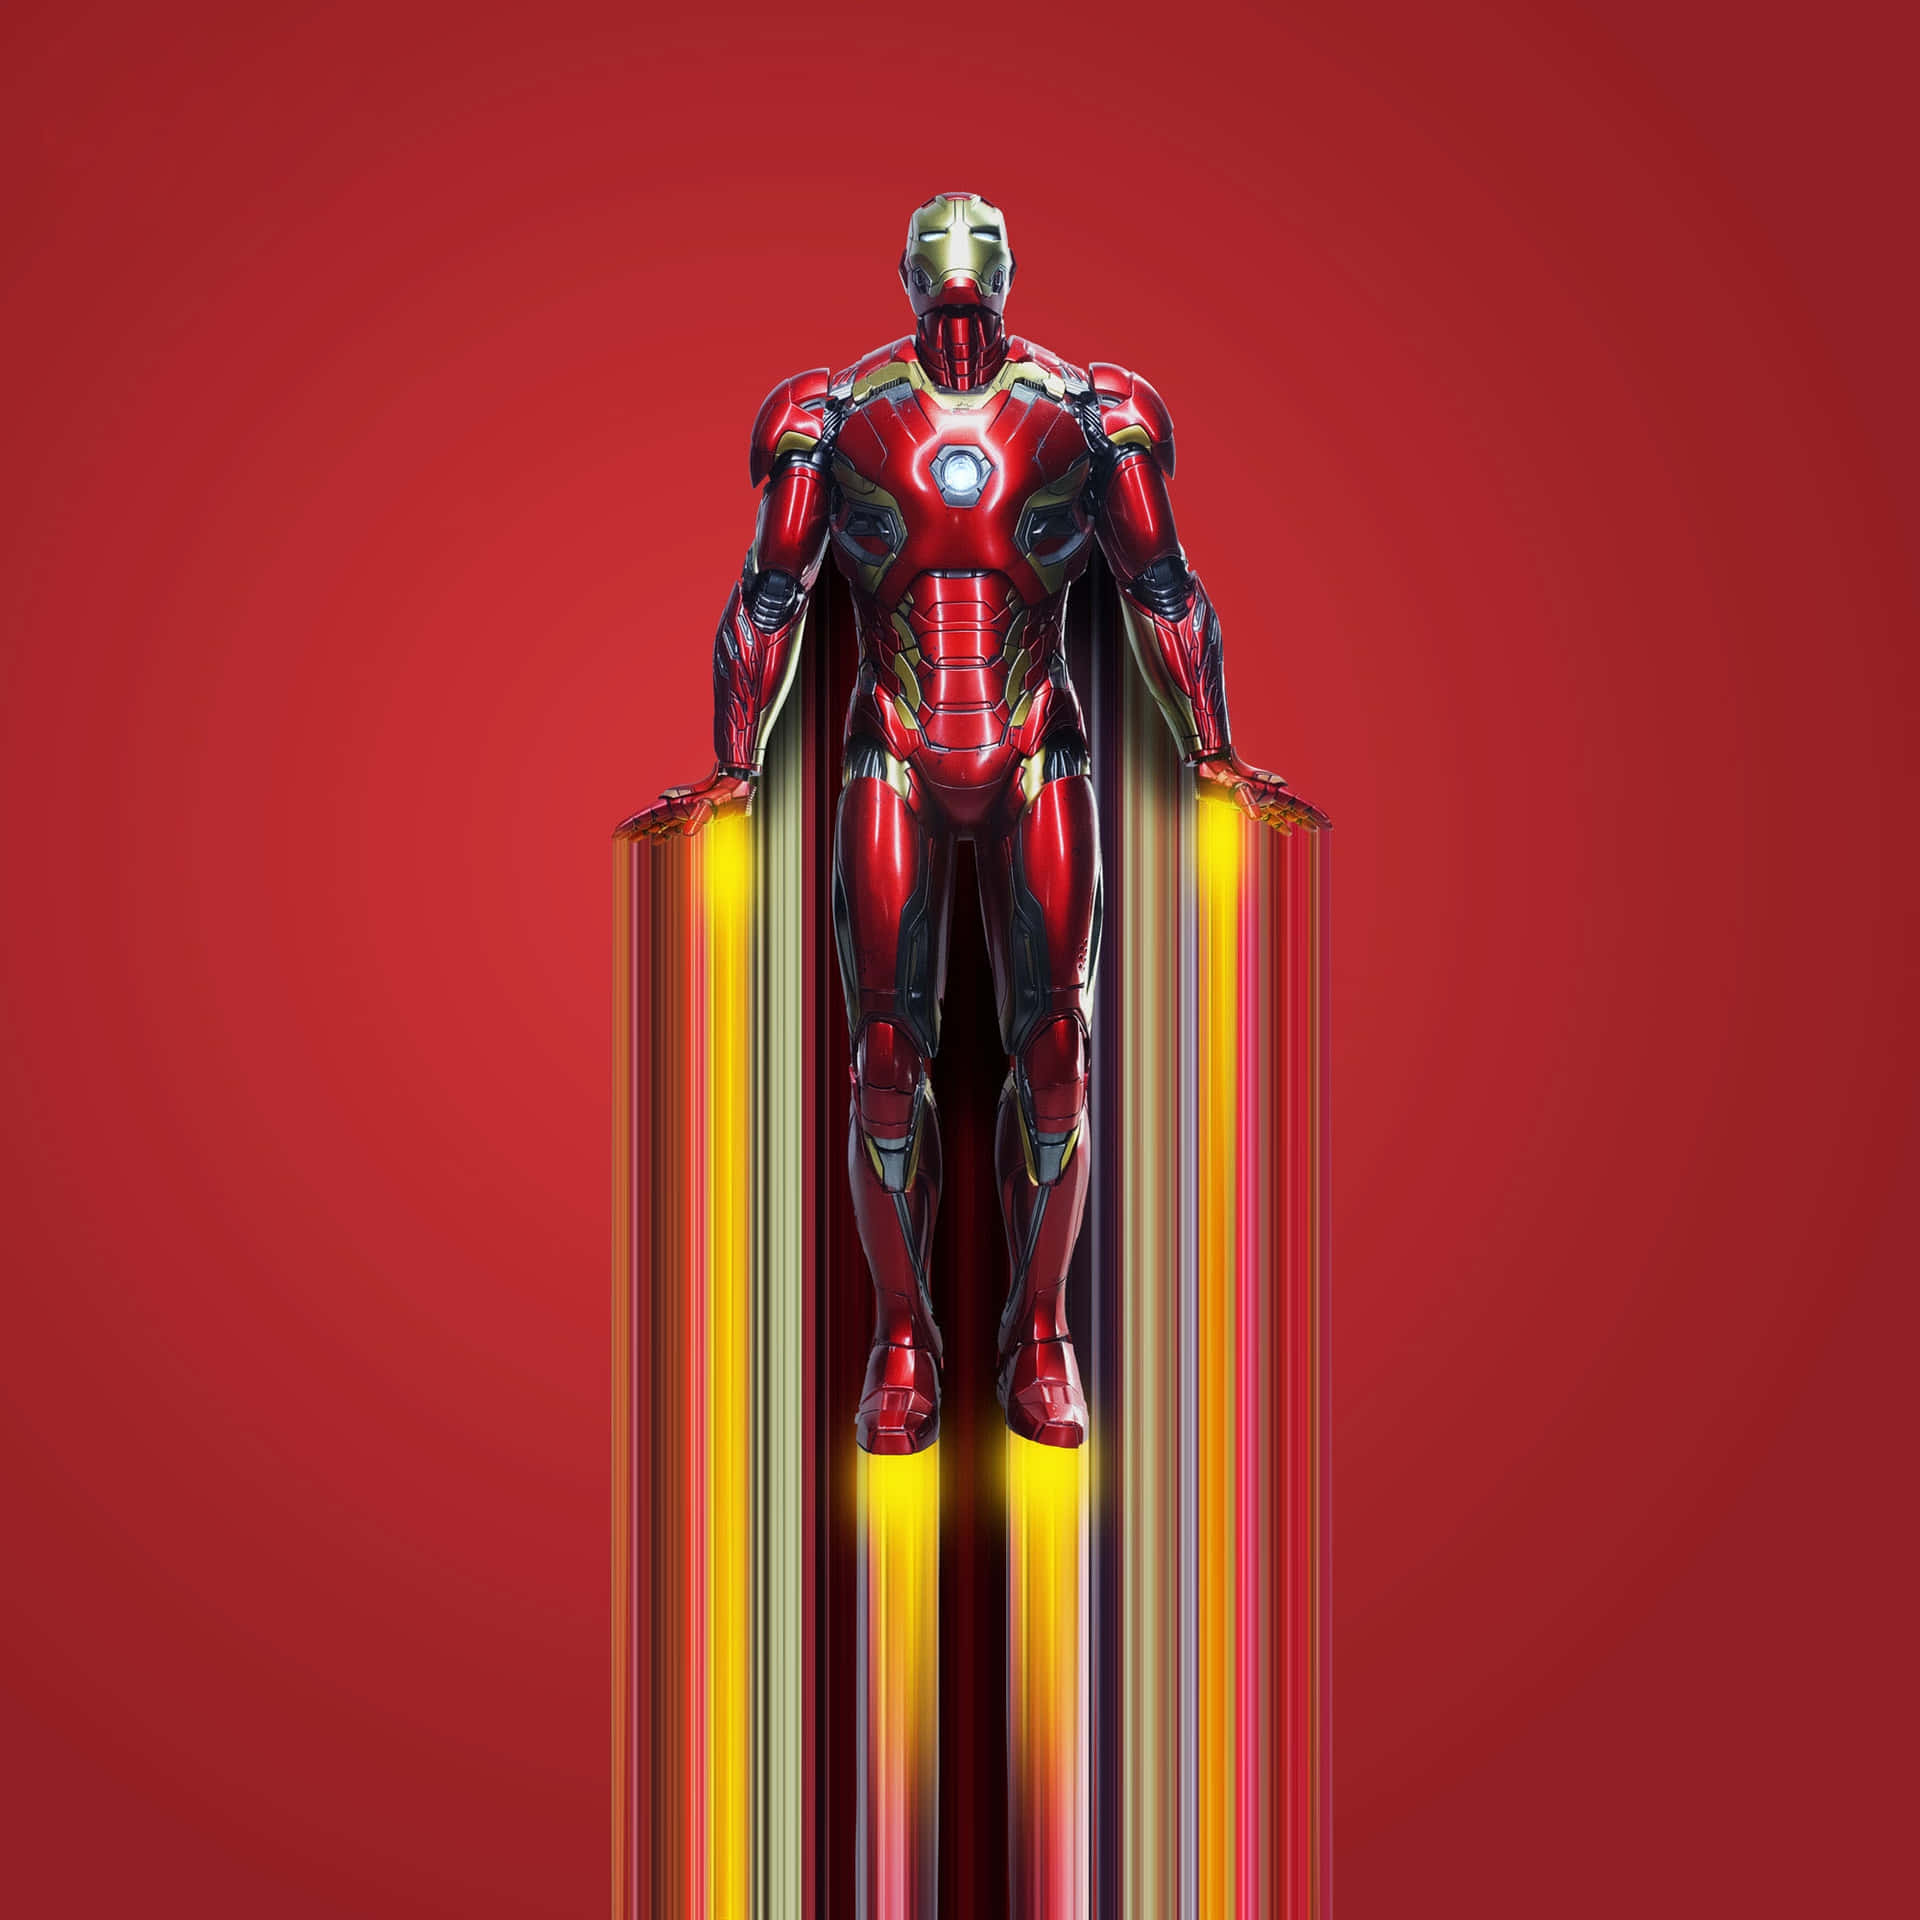 Iron Man Standing Against Red Background Wallpaper